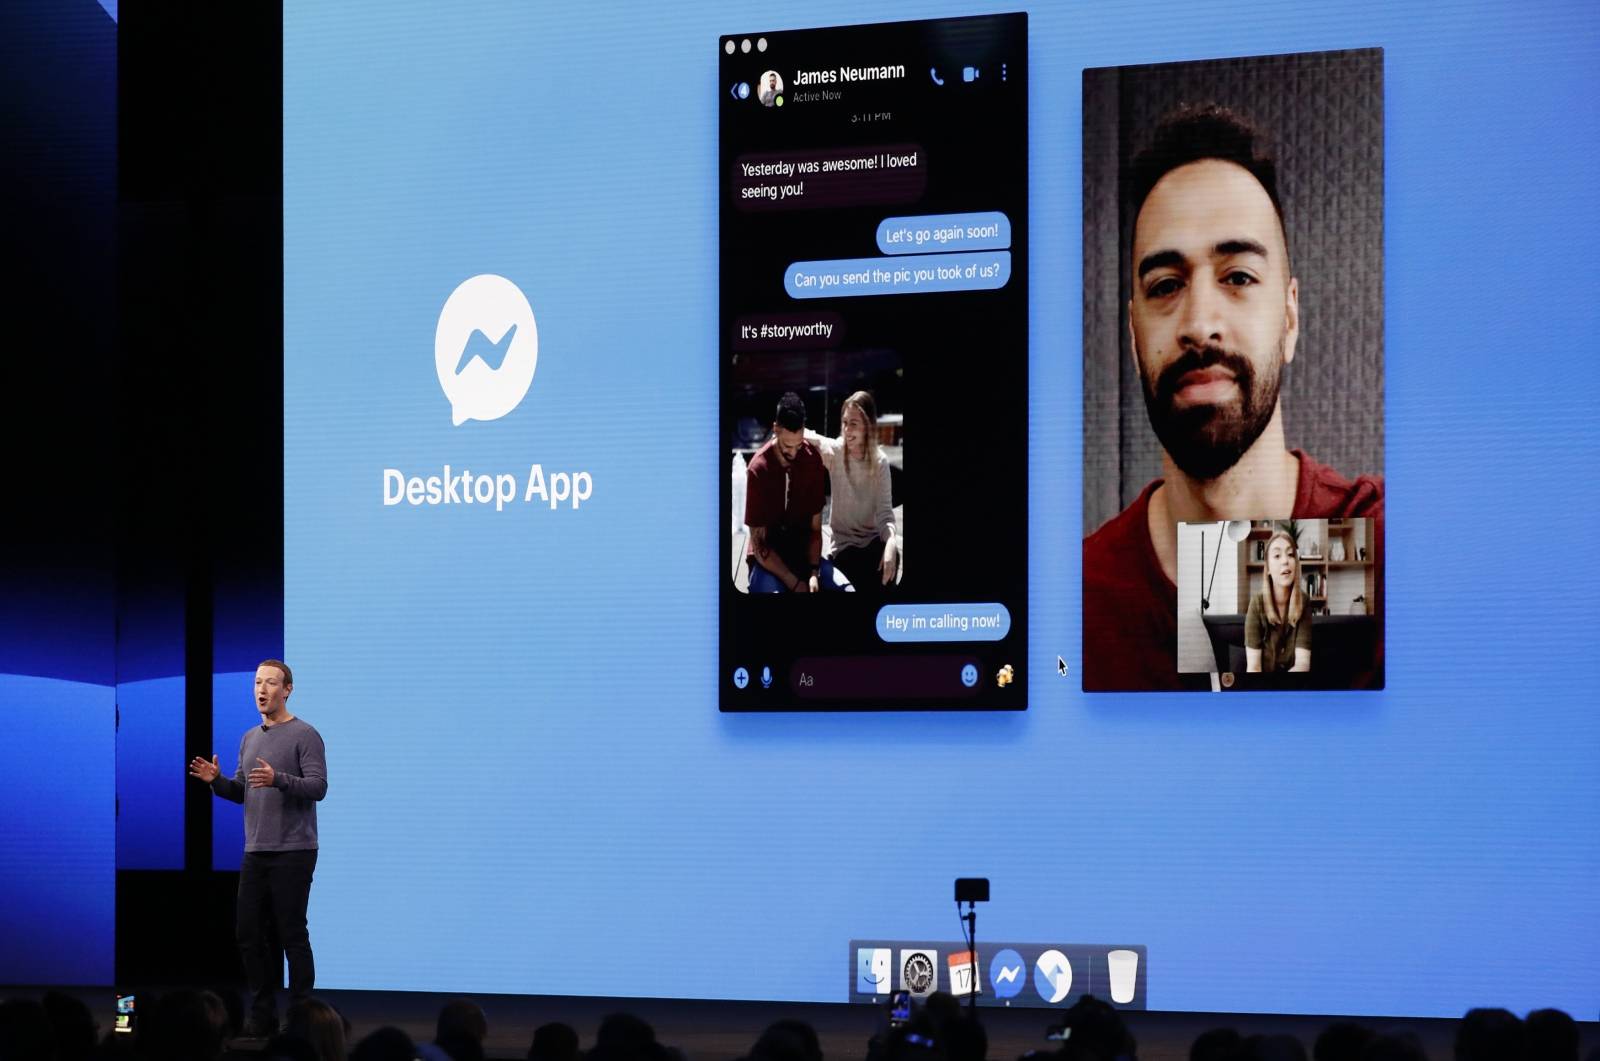 Facebook CEO Mark Zuckerberg speaks about a new desktop app during his keynote at Facebook Inc's annual F8 developers conference in San Jose